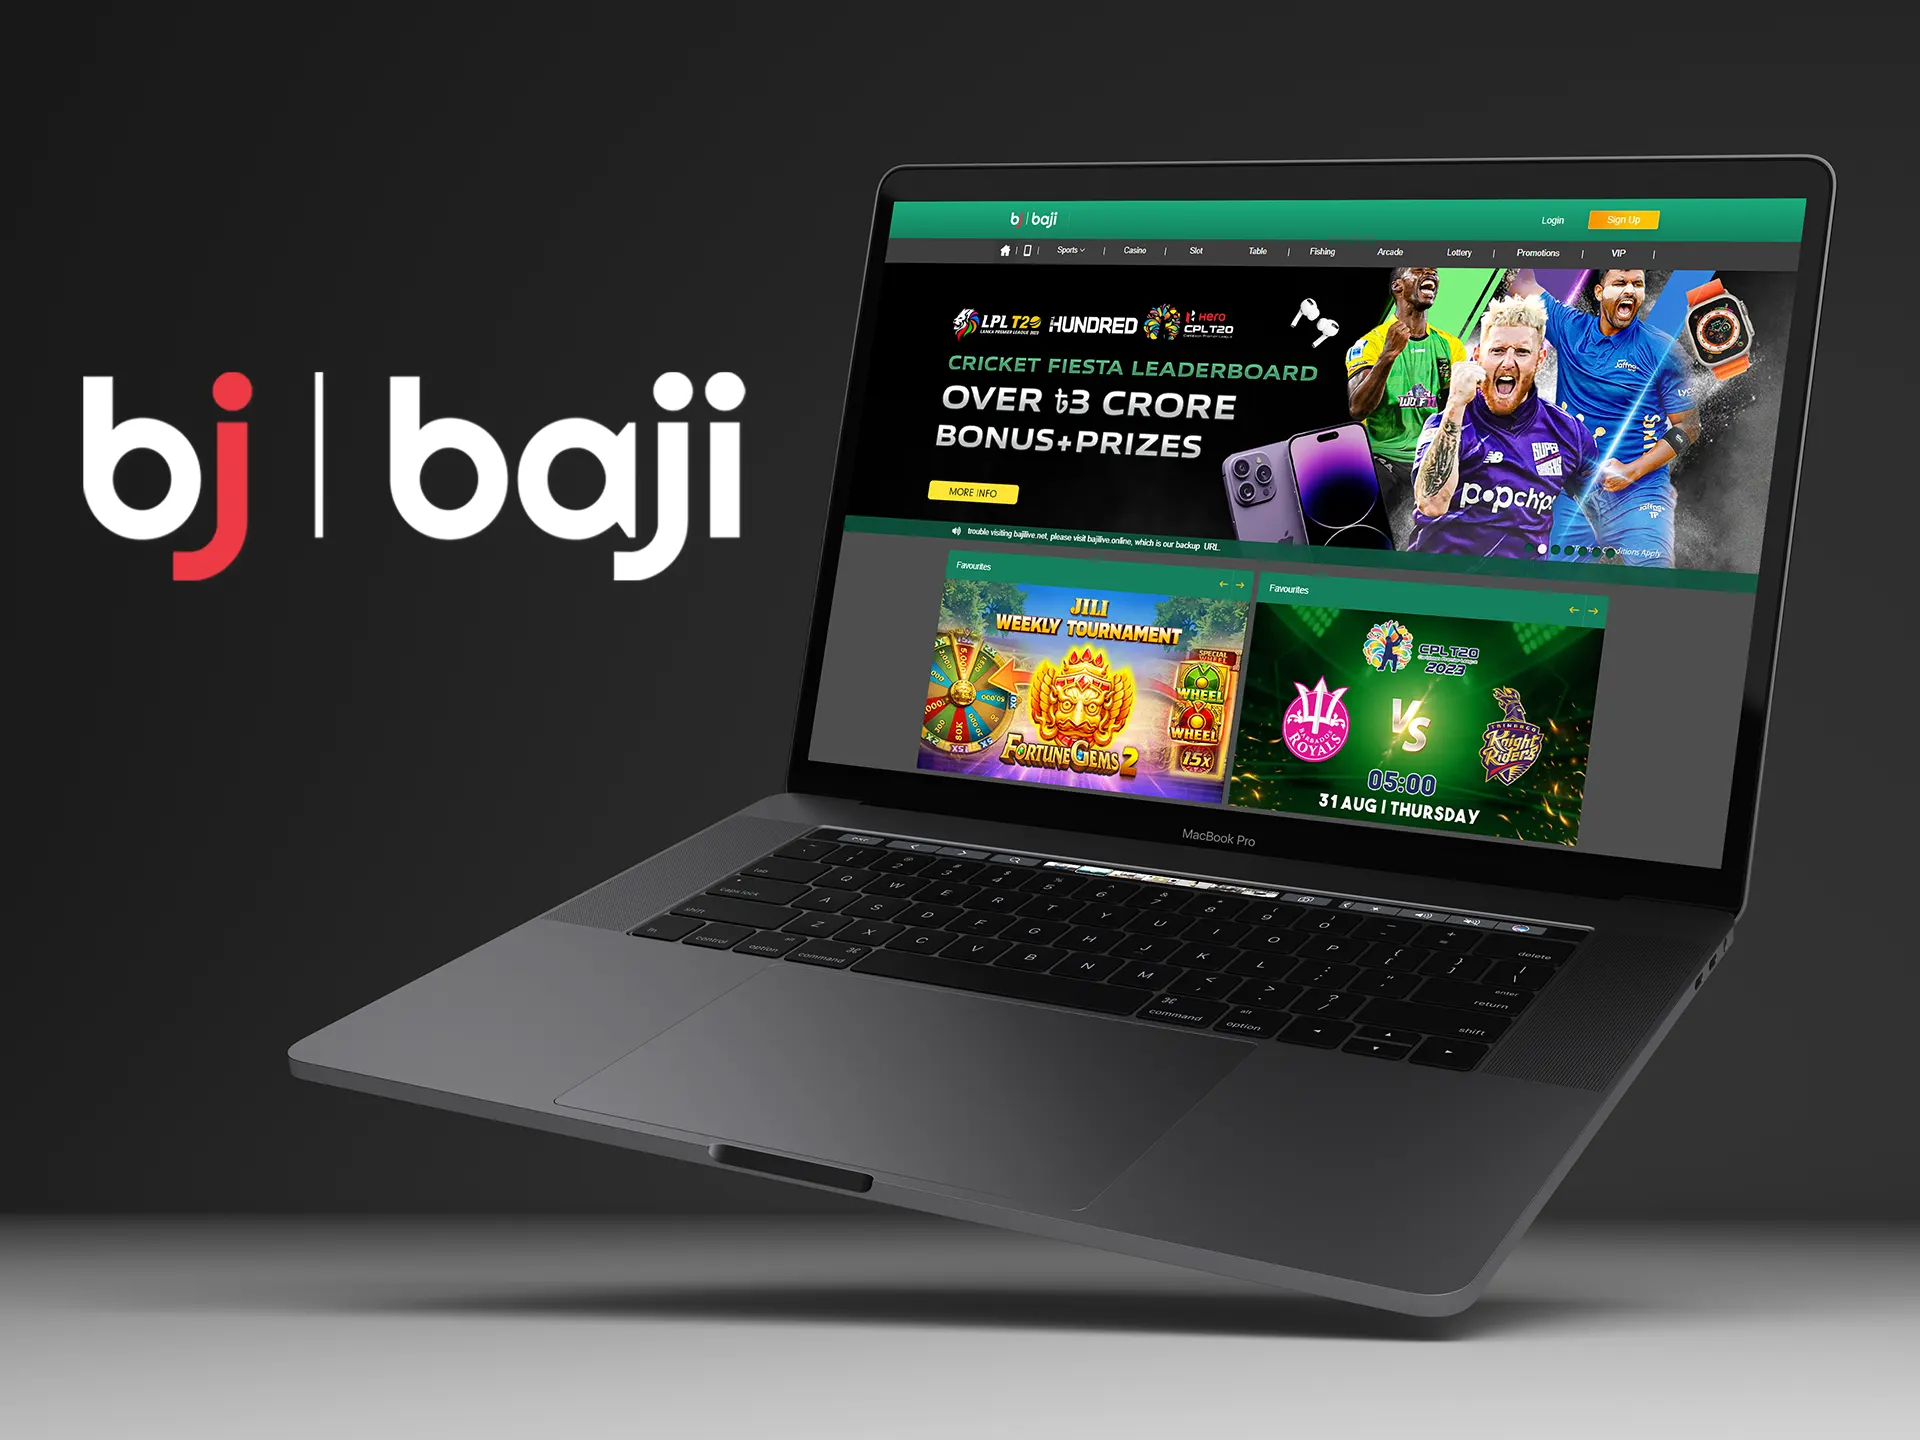 Bet on sports and play casino games at the Baji.